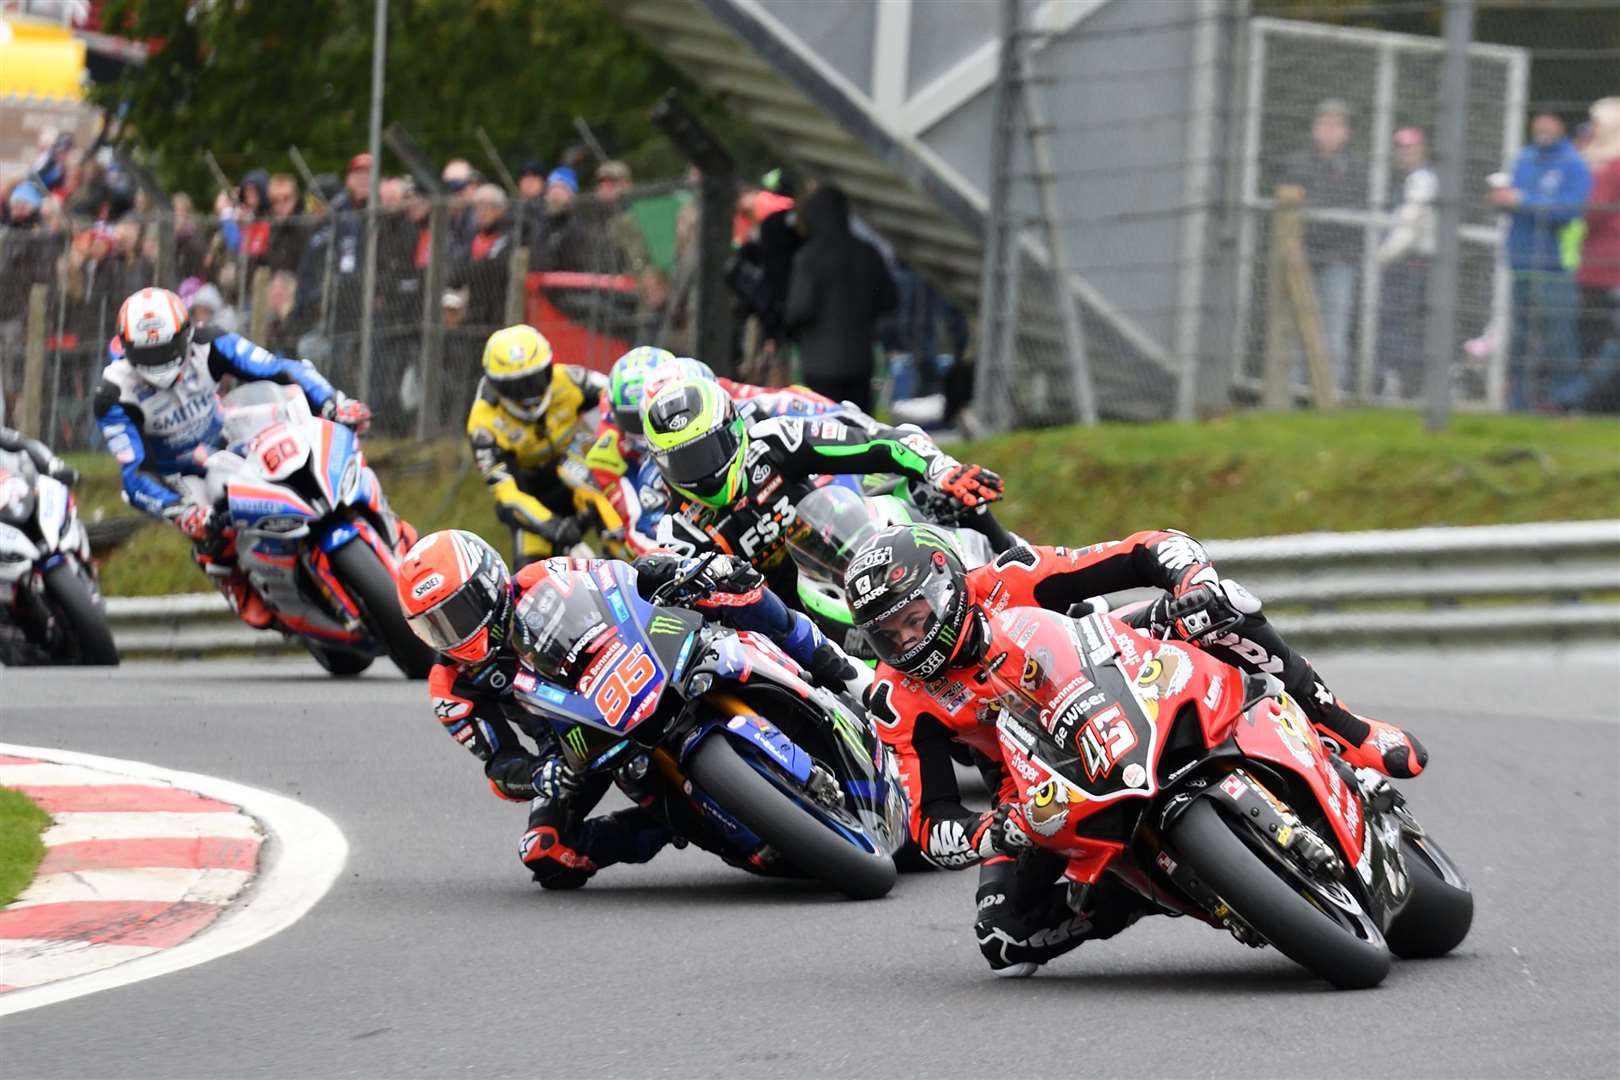 The BSB finals took place at Brands Hatch in 2019 and will do again this year - organisers hope Picture: Simon Hildrew